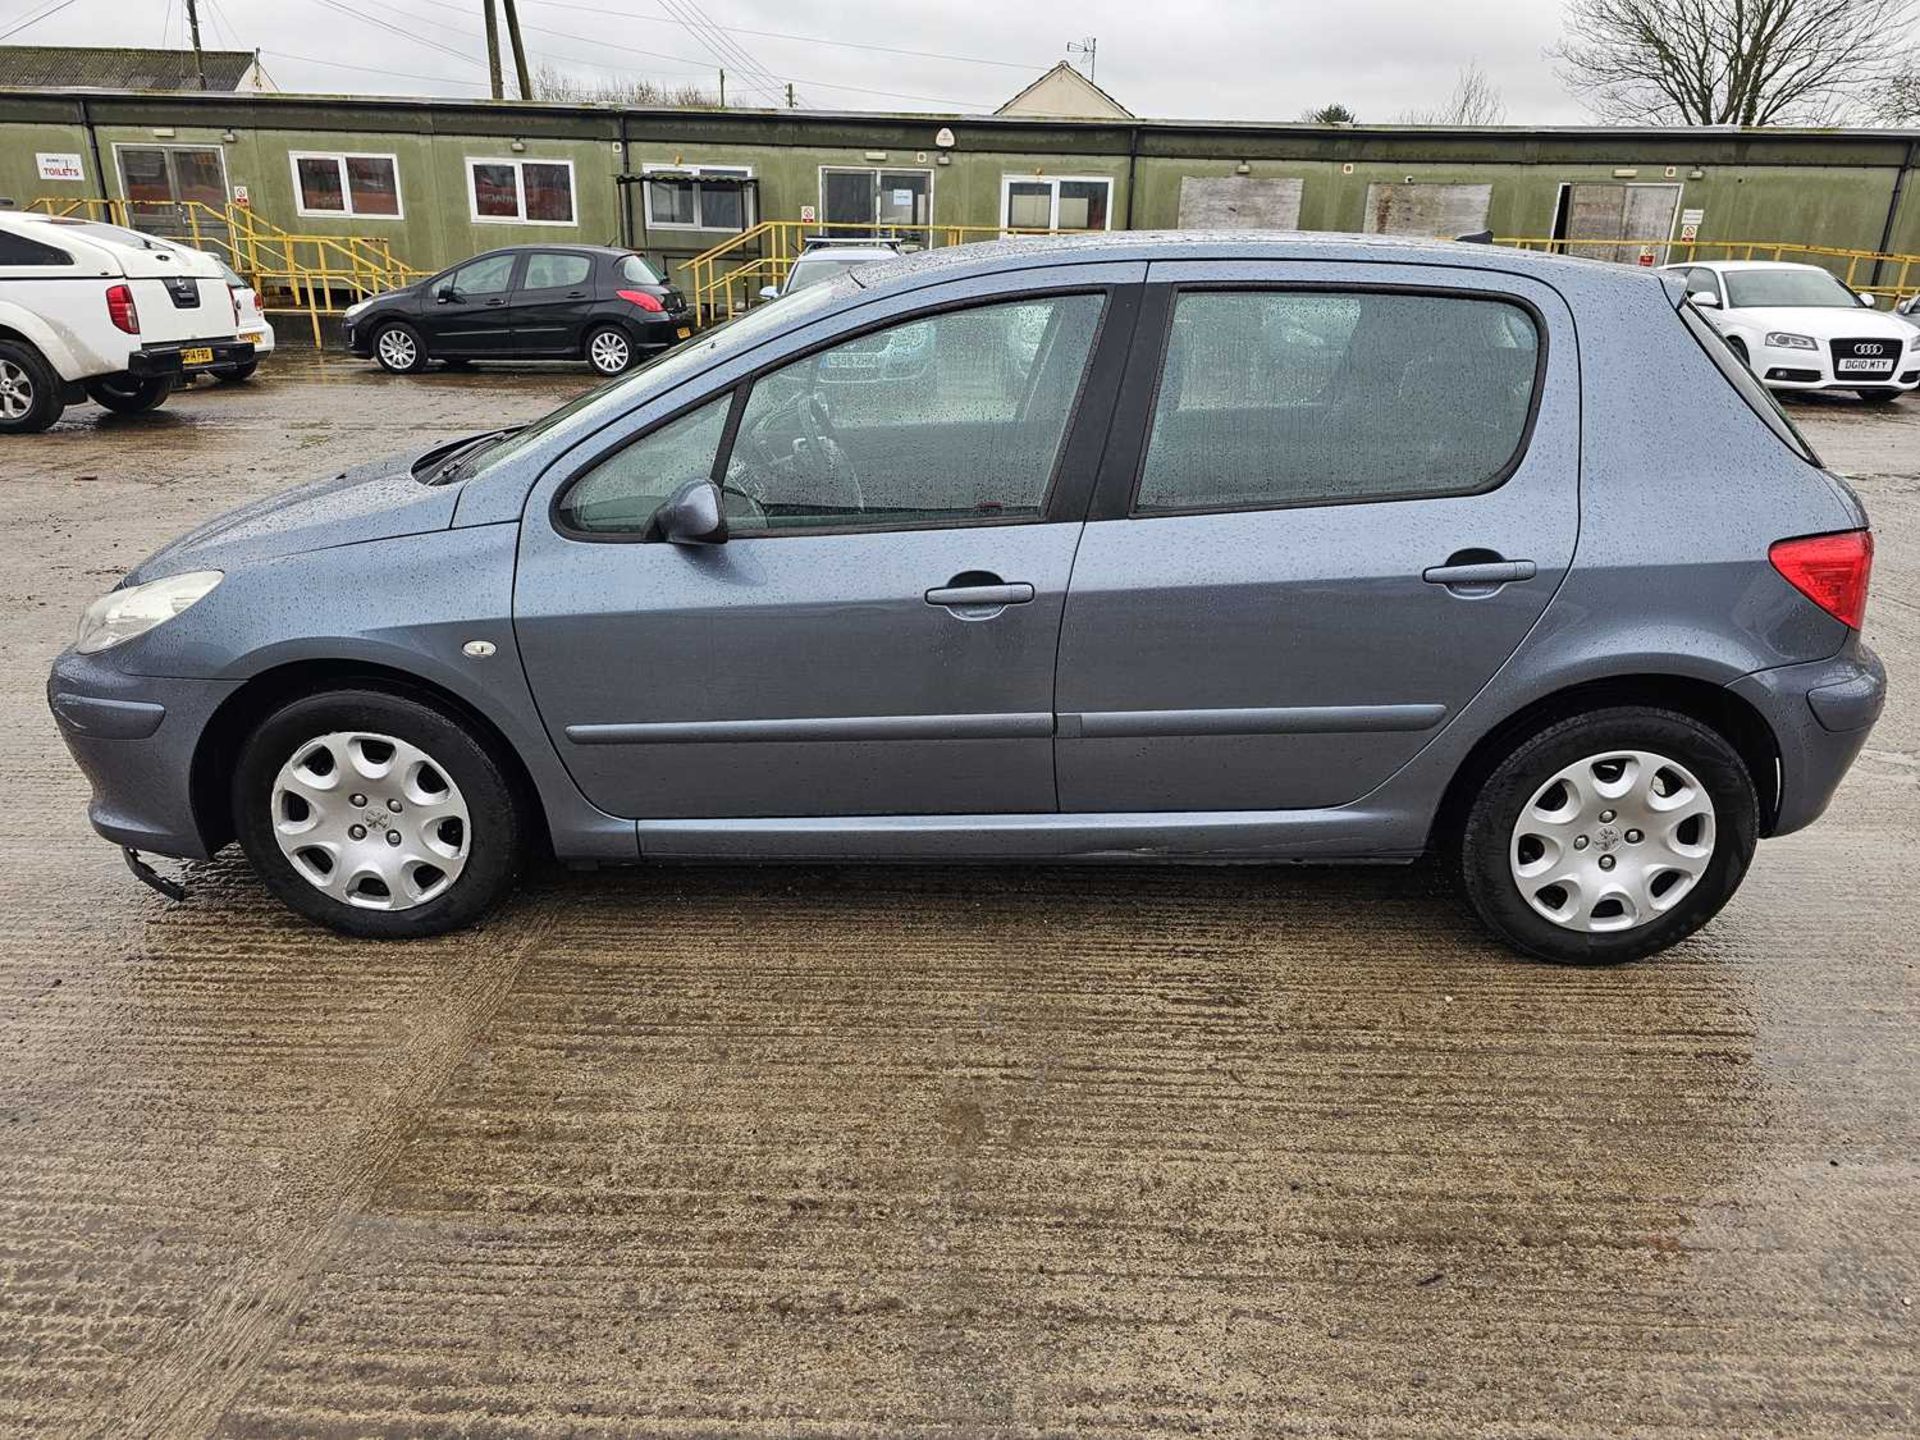 2007 Peugeot 307 X-line, 5 Speed, A/C (Reg. Docs. Available, Tested 11/24) - Image 6 of 28